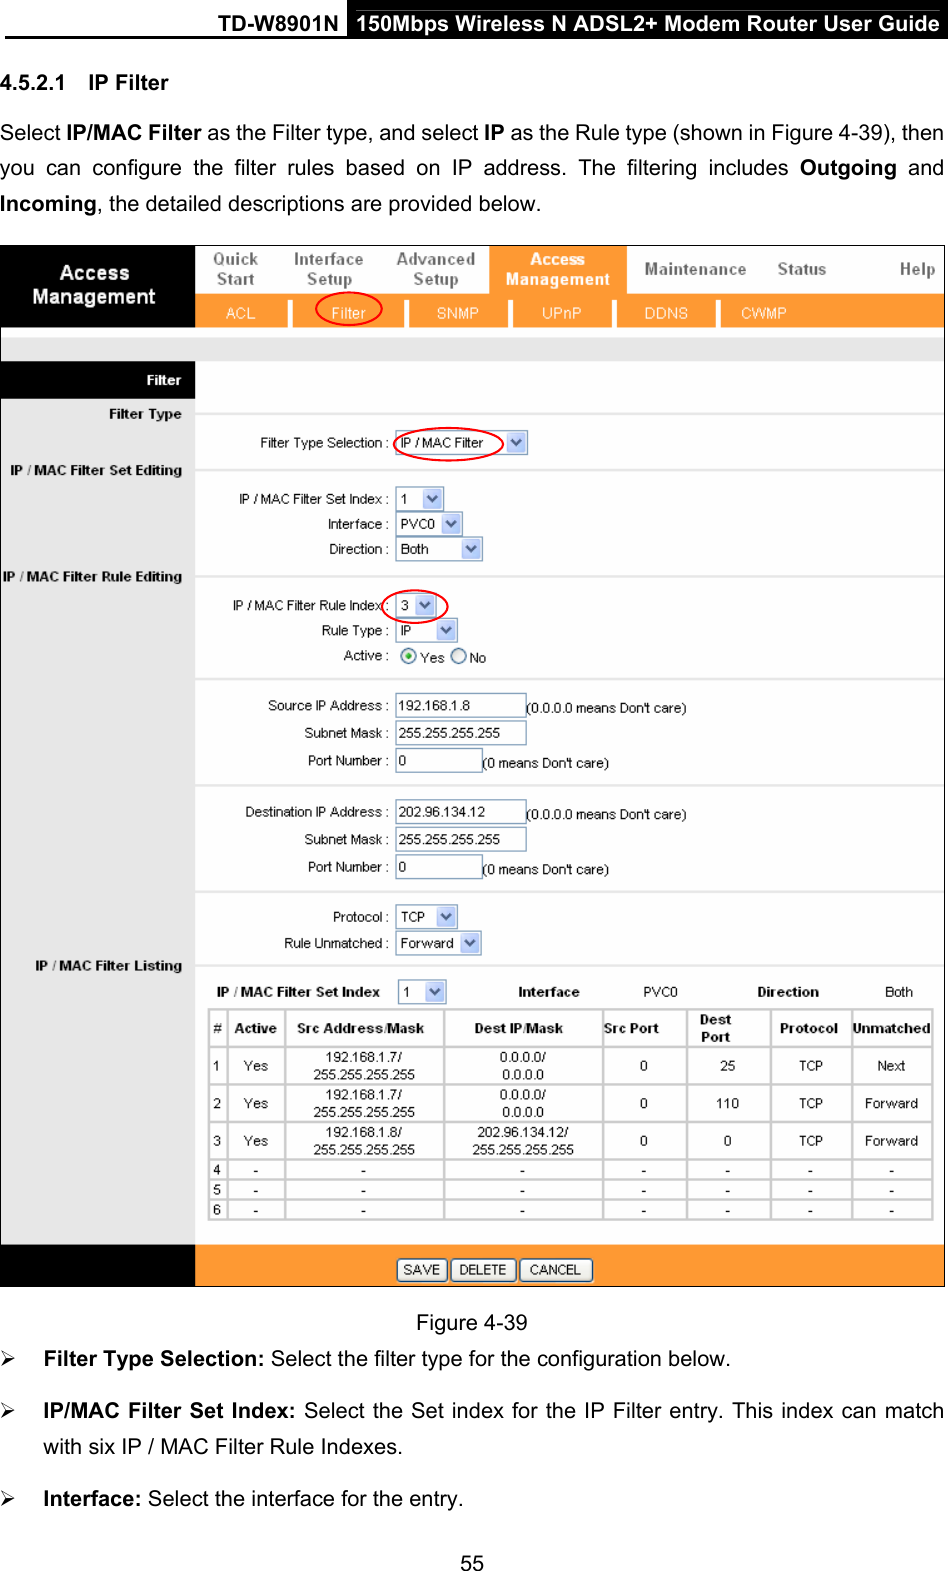 TD-W8901N  150Mbps Wireless N ADSL2+ Modem Router User Guide 55 4.5.2.1  IP Filter Select IP/MAC Filter as the Filter type, and select IP as the Rule type (shown in Figure 4-39), then you can configure the filter rules based on IP address. The filtering includes Outgoing  and Incoming, the detailed descriptions are provided below.  Figure 4-39  Filter Type Selection: Select the filter type for the configuration below.  IP/MAC Filter Set Index: Select the Set index for the IP Filter entry. This index can match with six IP / MAC Filter Rule Indexes.  Interface: Select the interface for the entry. 